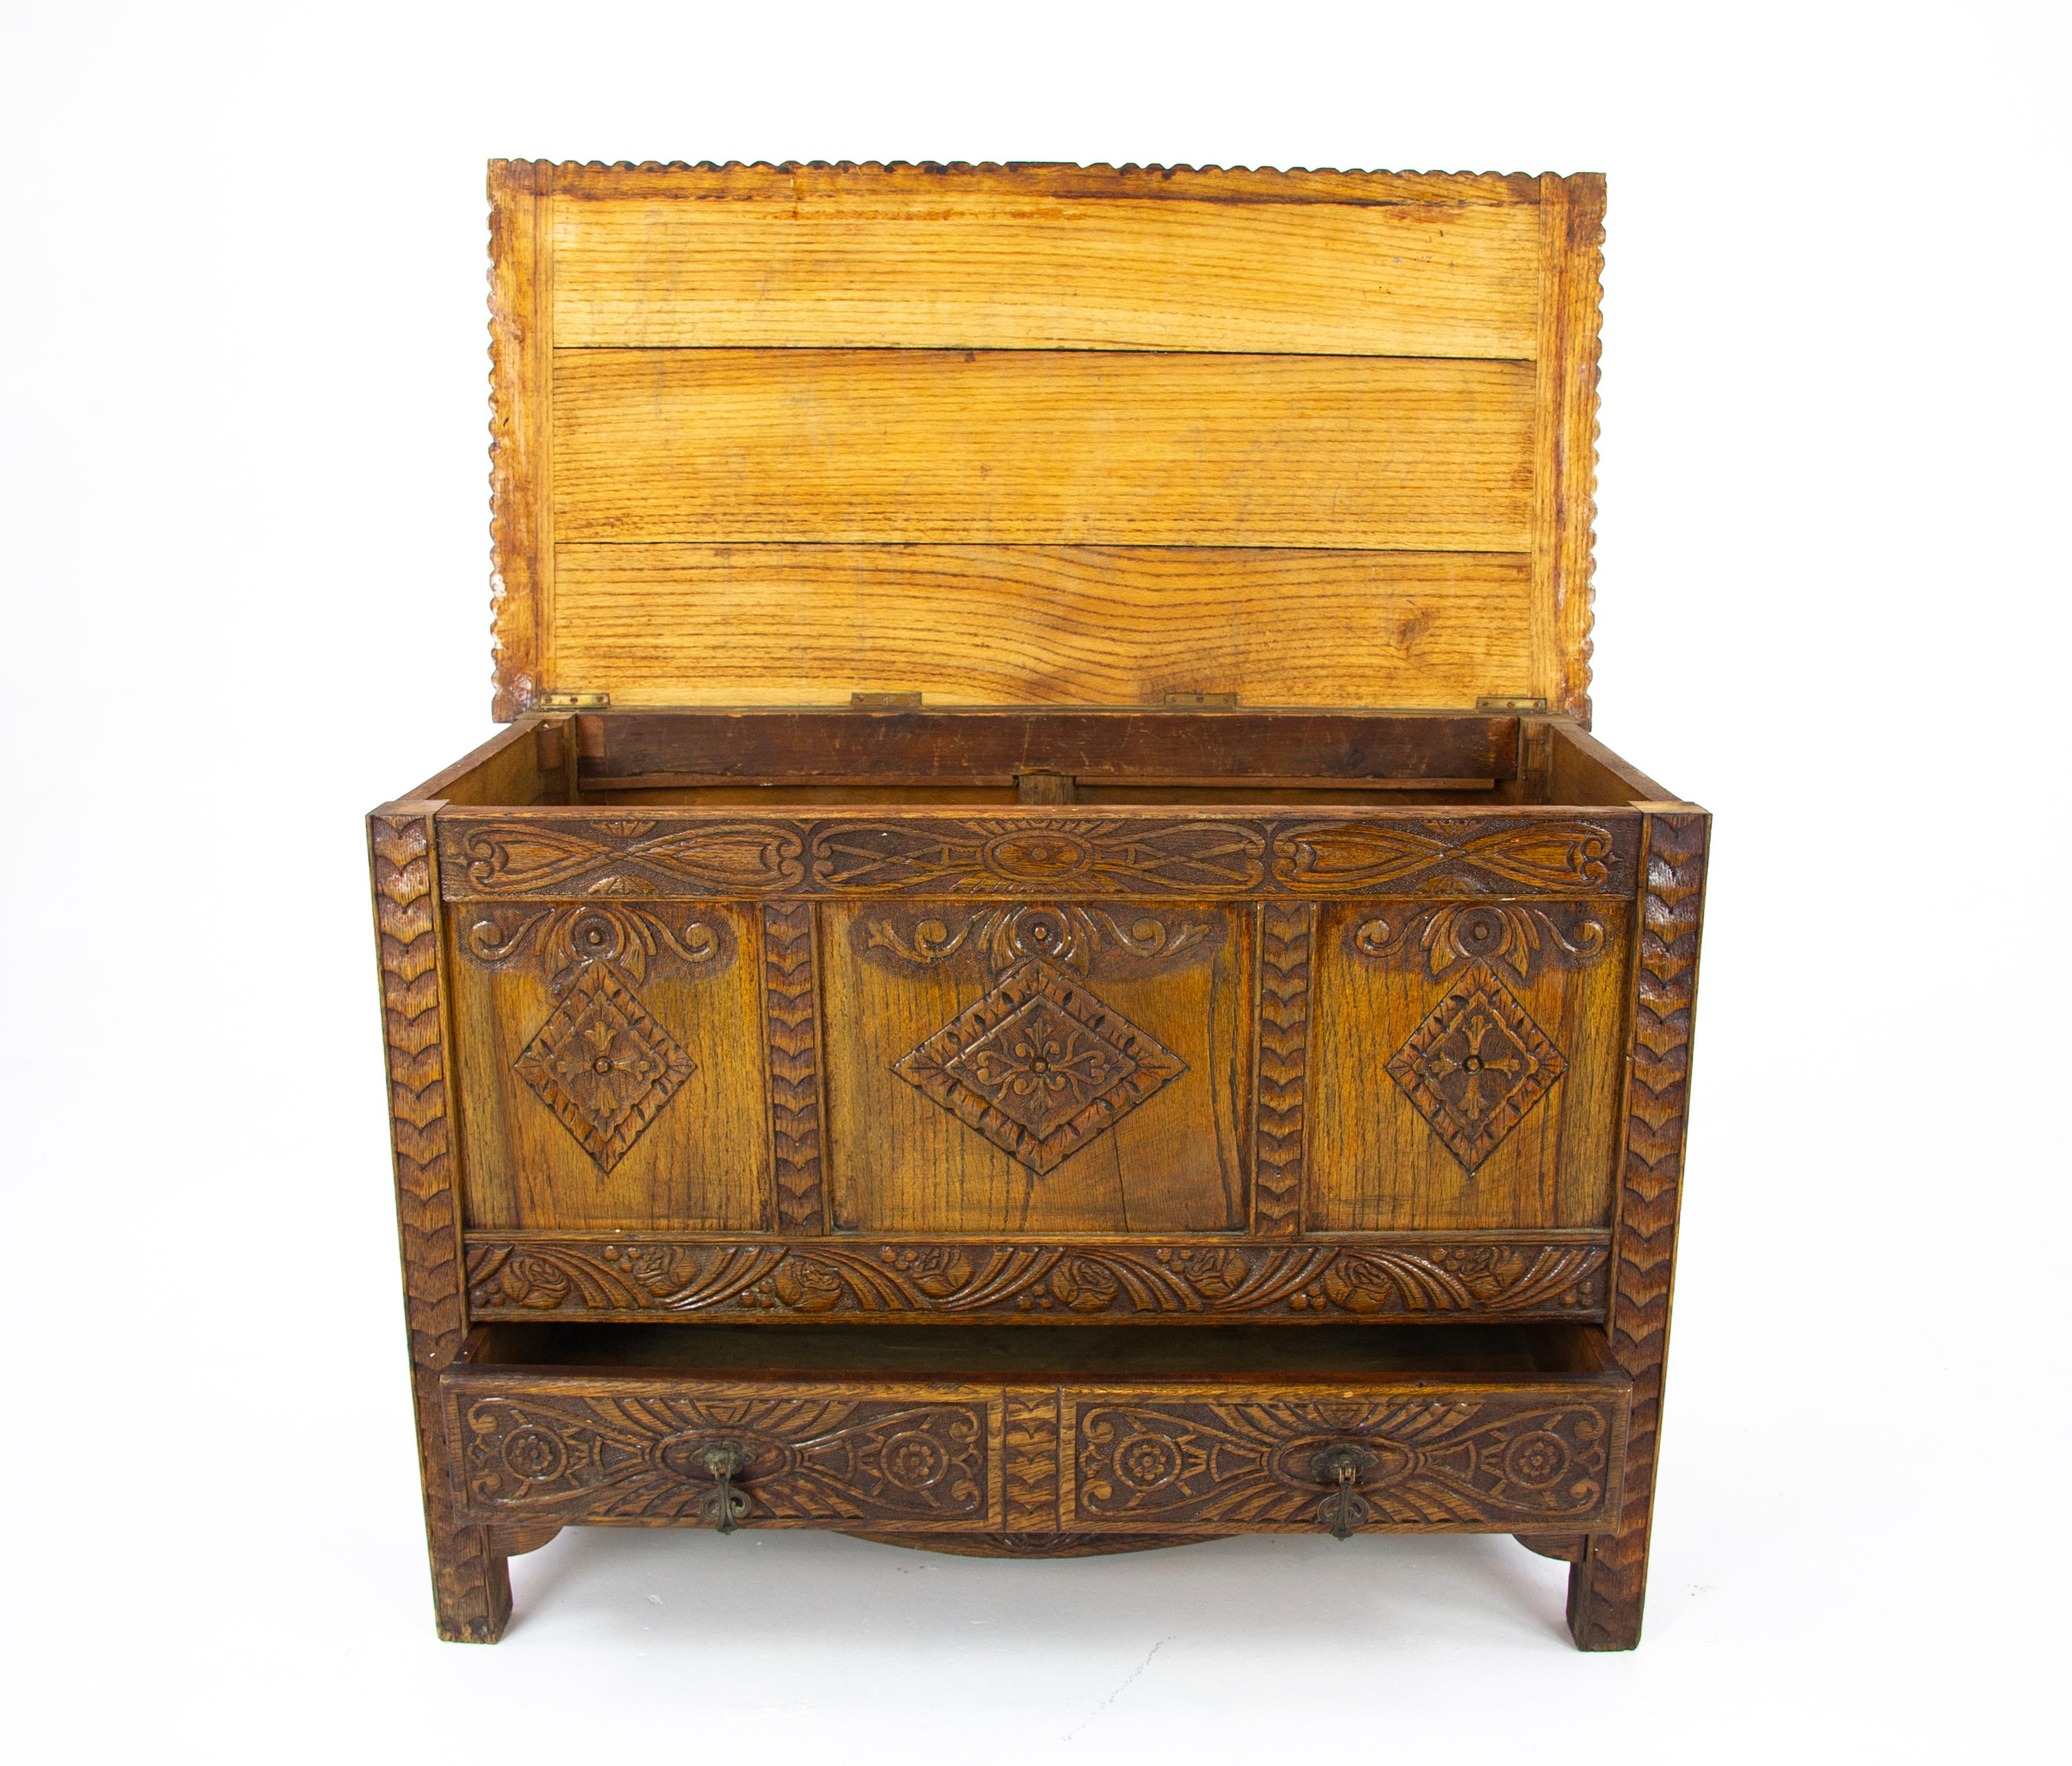 Carved oak chest, oak blanket box, carved trunk, oak coffer, Victorian chest, Scotland, 1890, Antique Furniture, B1278, 

Scotland, 1890
Solid oak construction
Lift up top with storage space interior
Heavily carved panels to the front
Carved